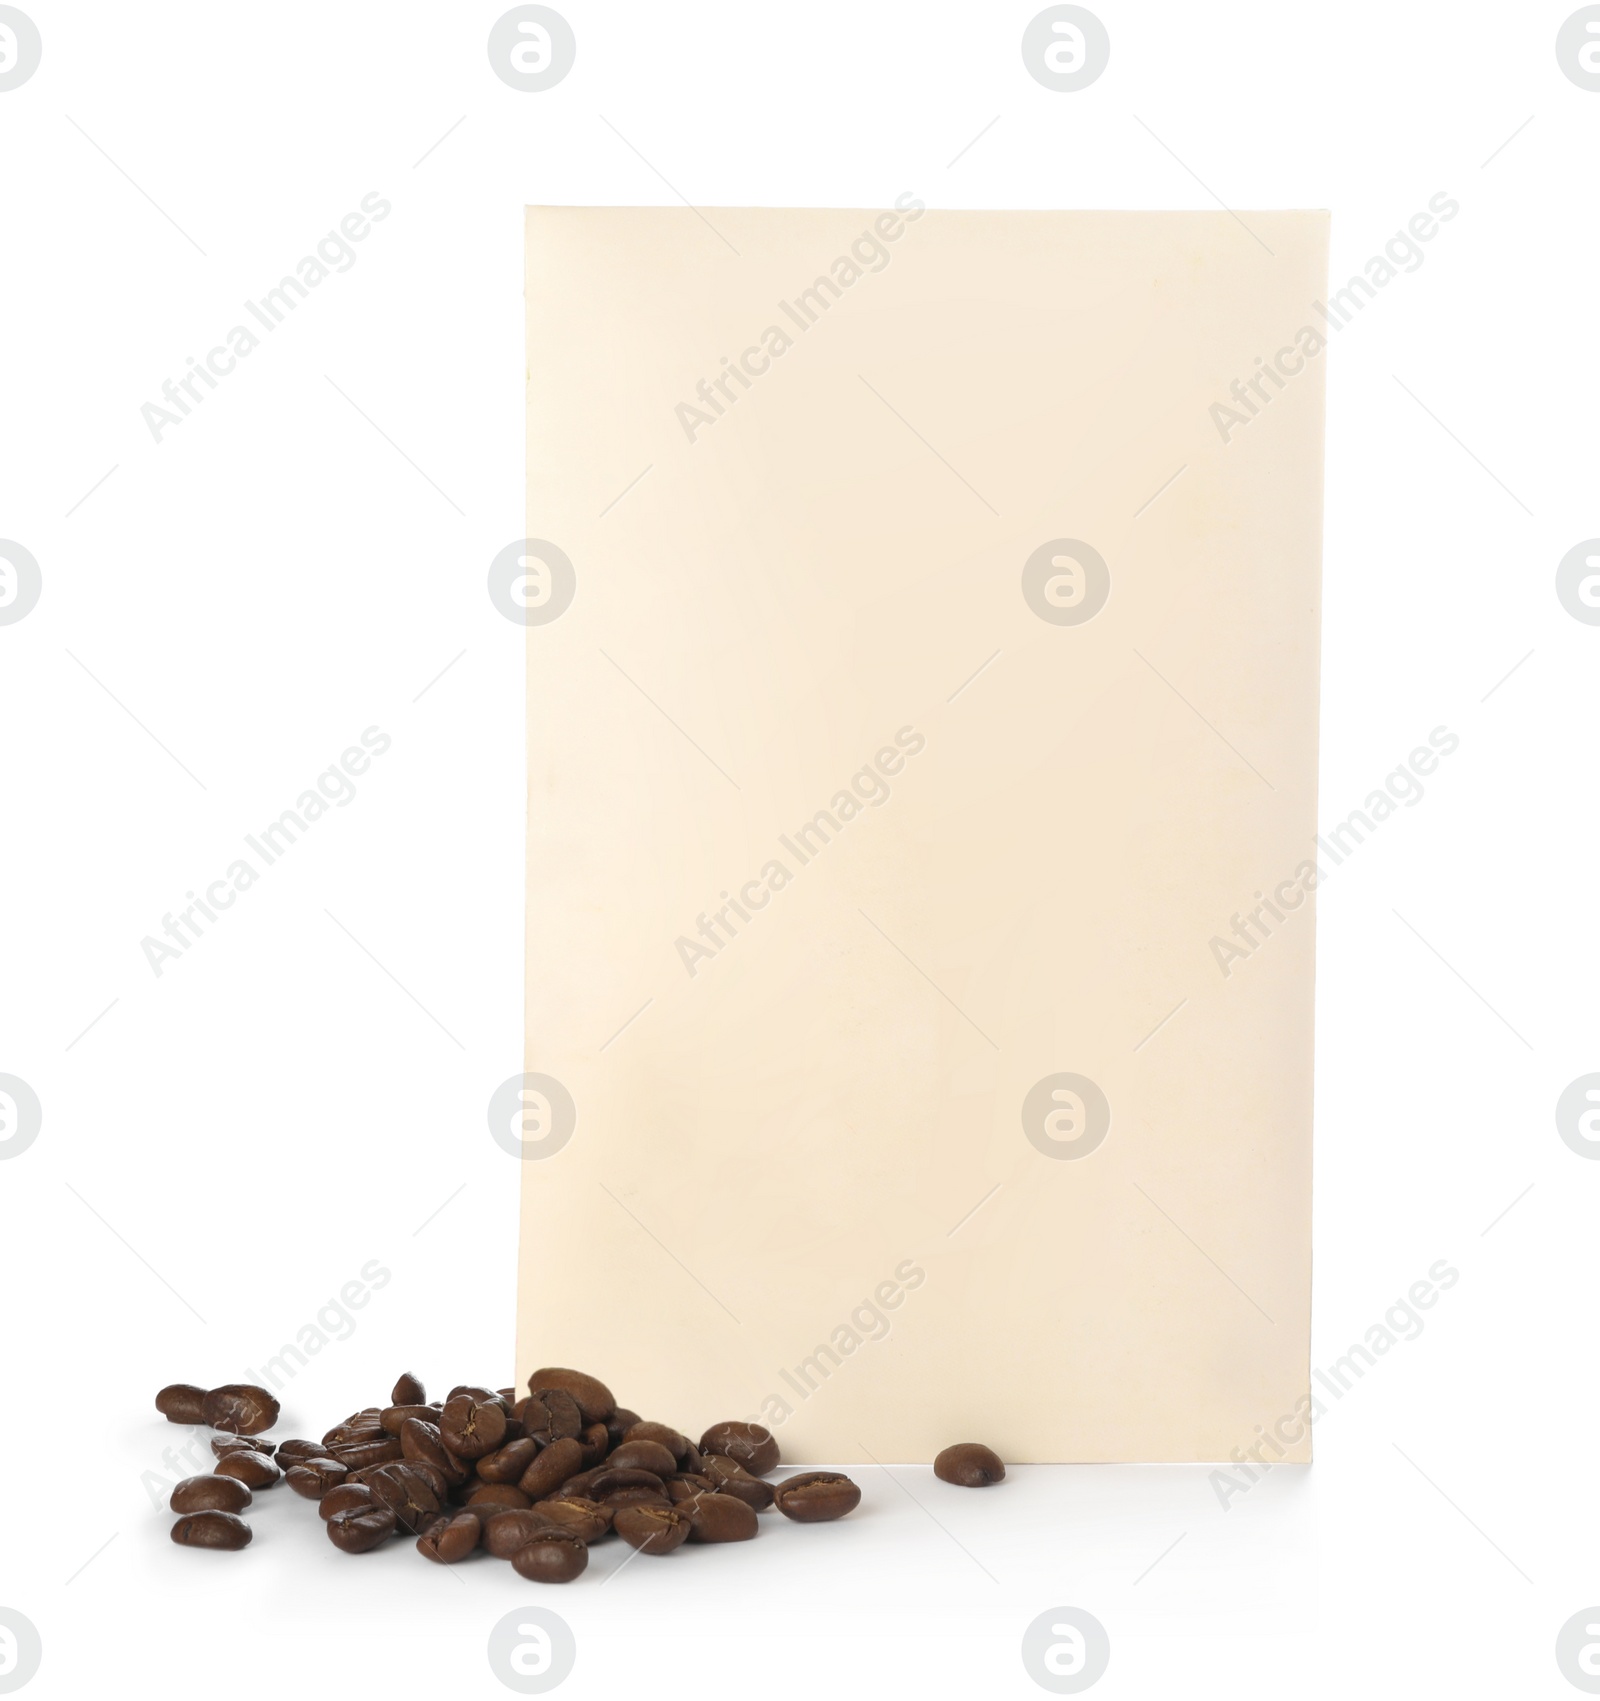 Photo of Scented sachet and coffee beans on white background